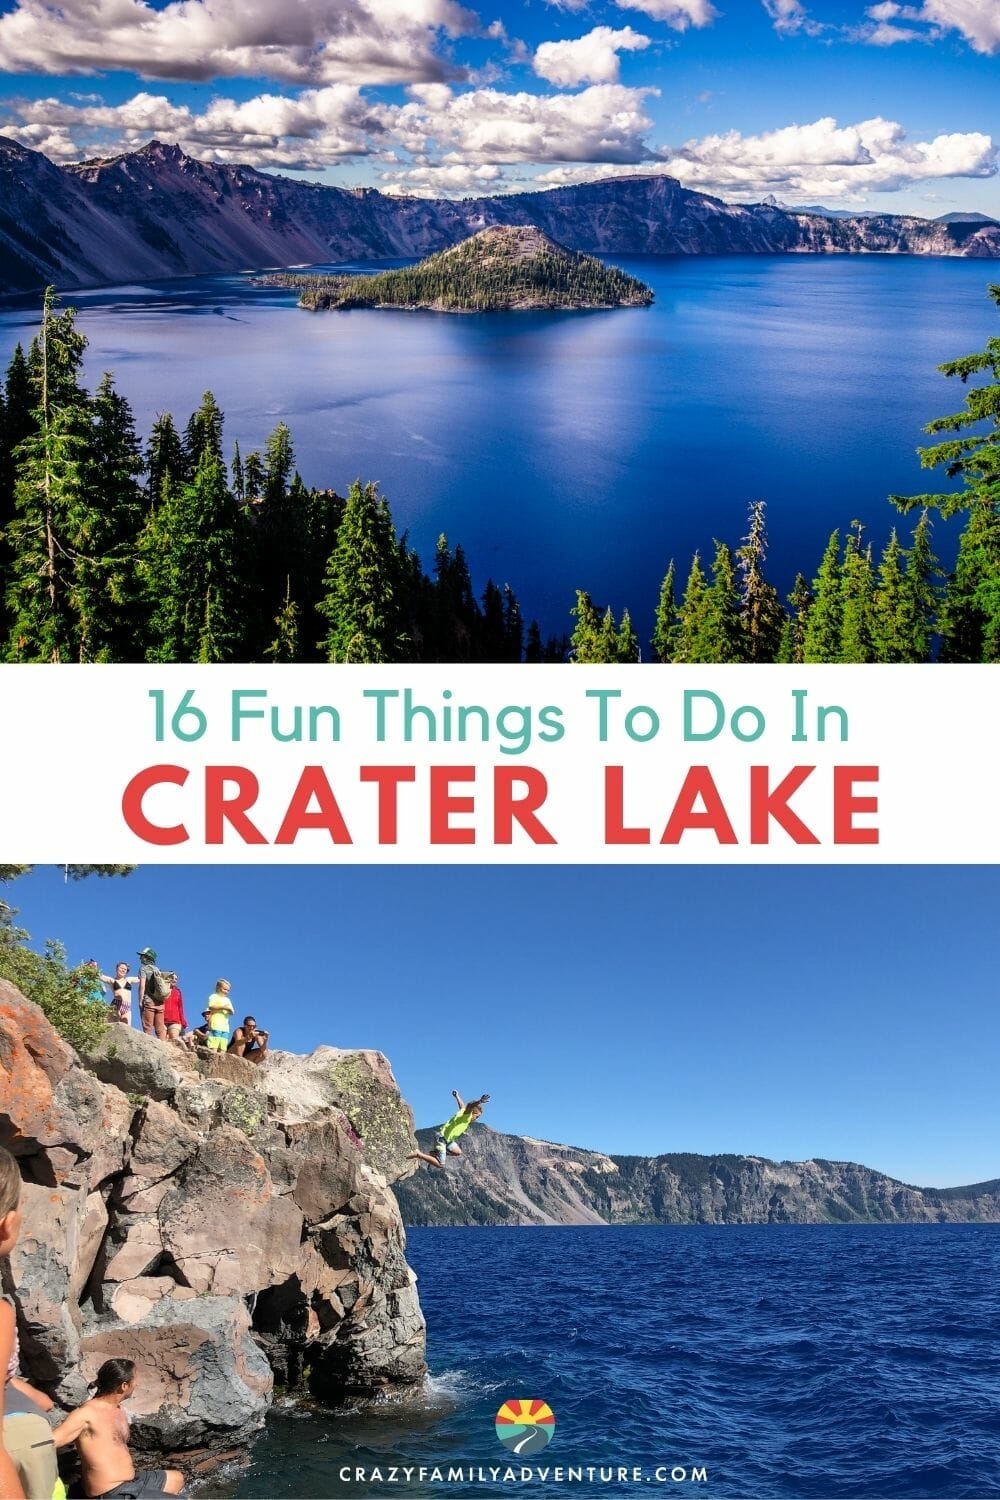 If you're craving new adventures, the list of things to do in Crater Lake National Park and its dramatic scenery will surely satisfy you!